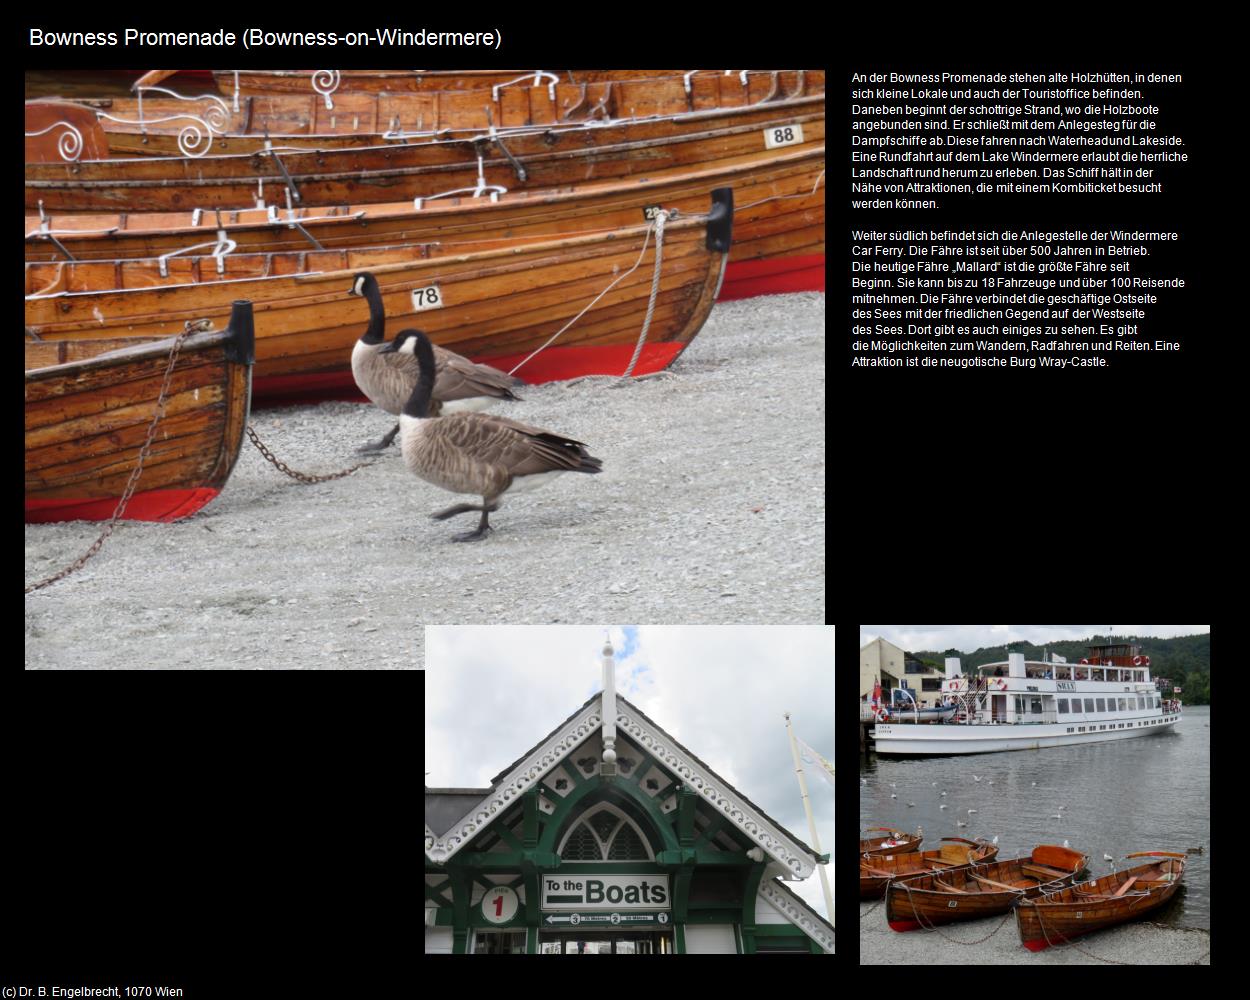 Bowness Promenade (Bowness-on-Windermere, England) in Kulturatlas-ENGLAND und WALES